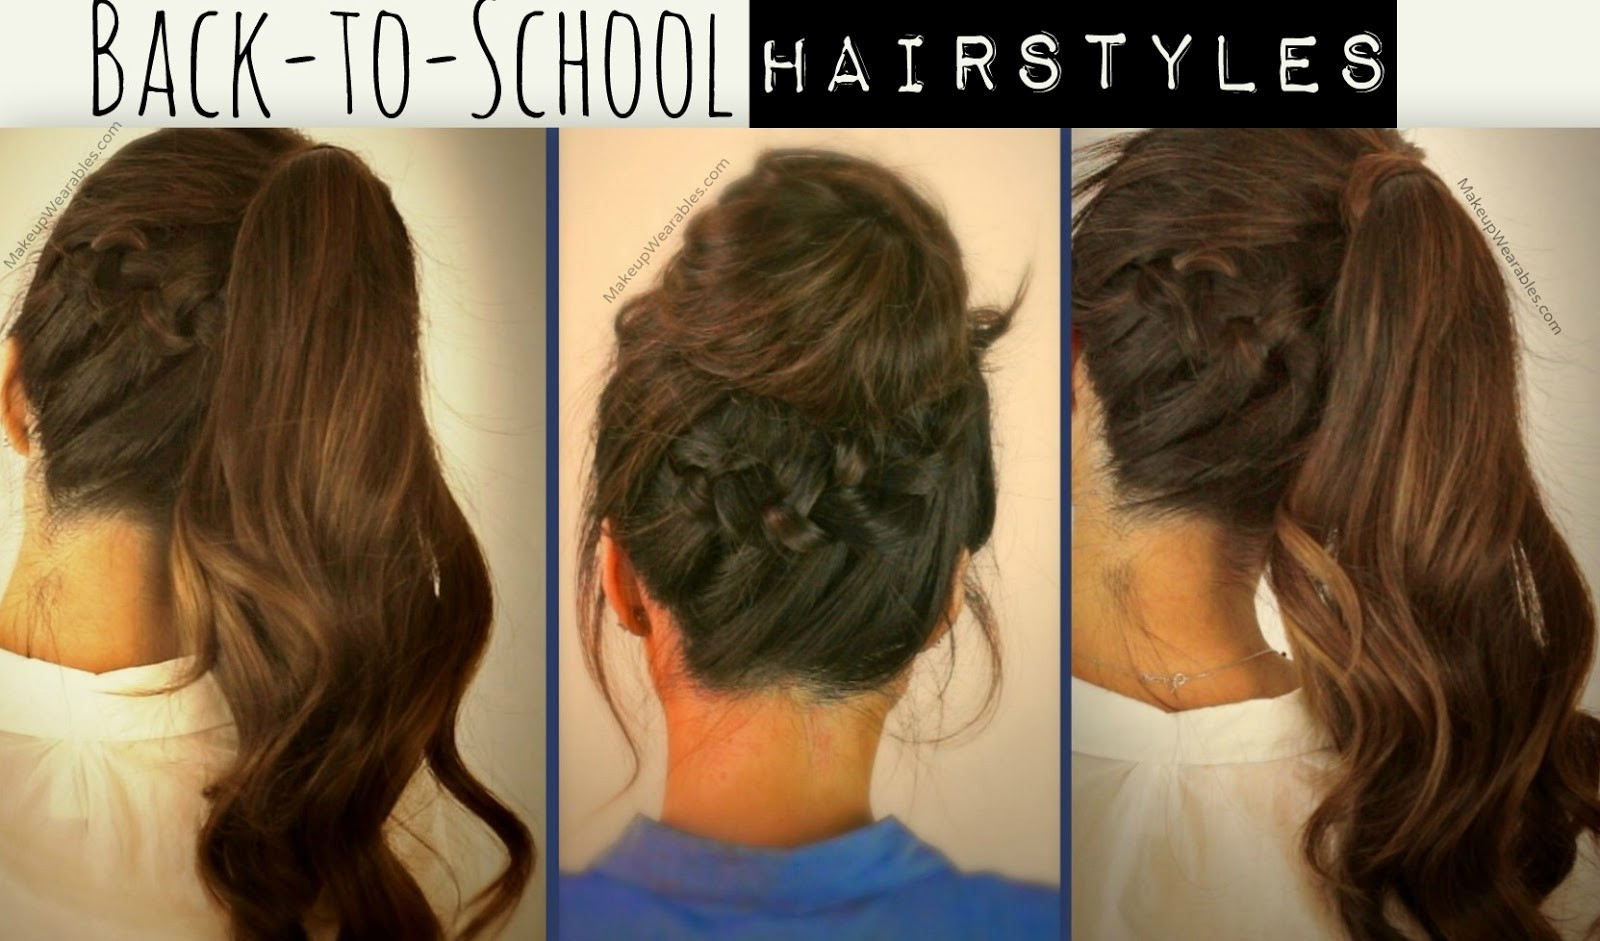 Cute Back To School Hairstyles
 Learn 3 Cute Everyday Casual Hairstyles Updos